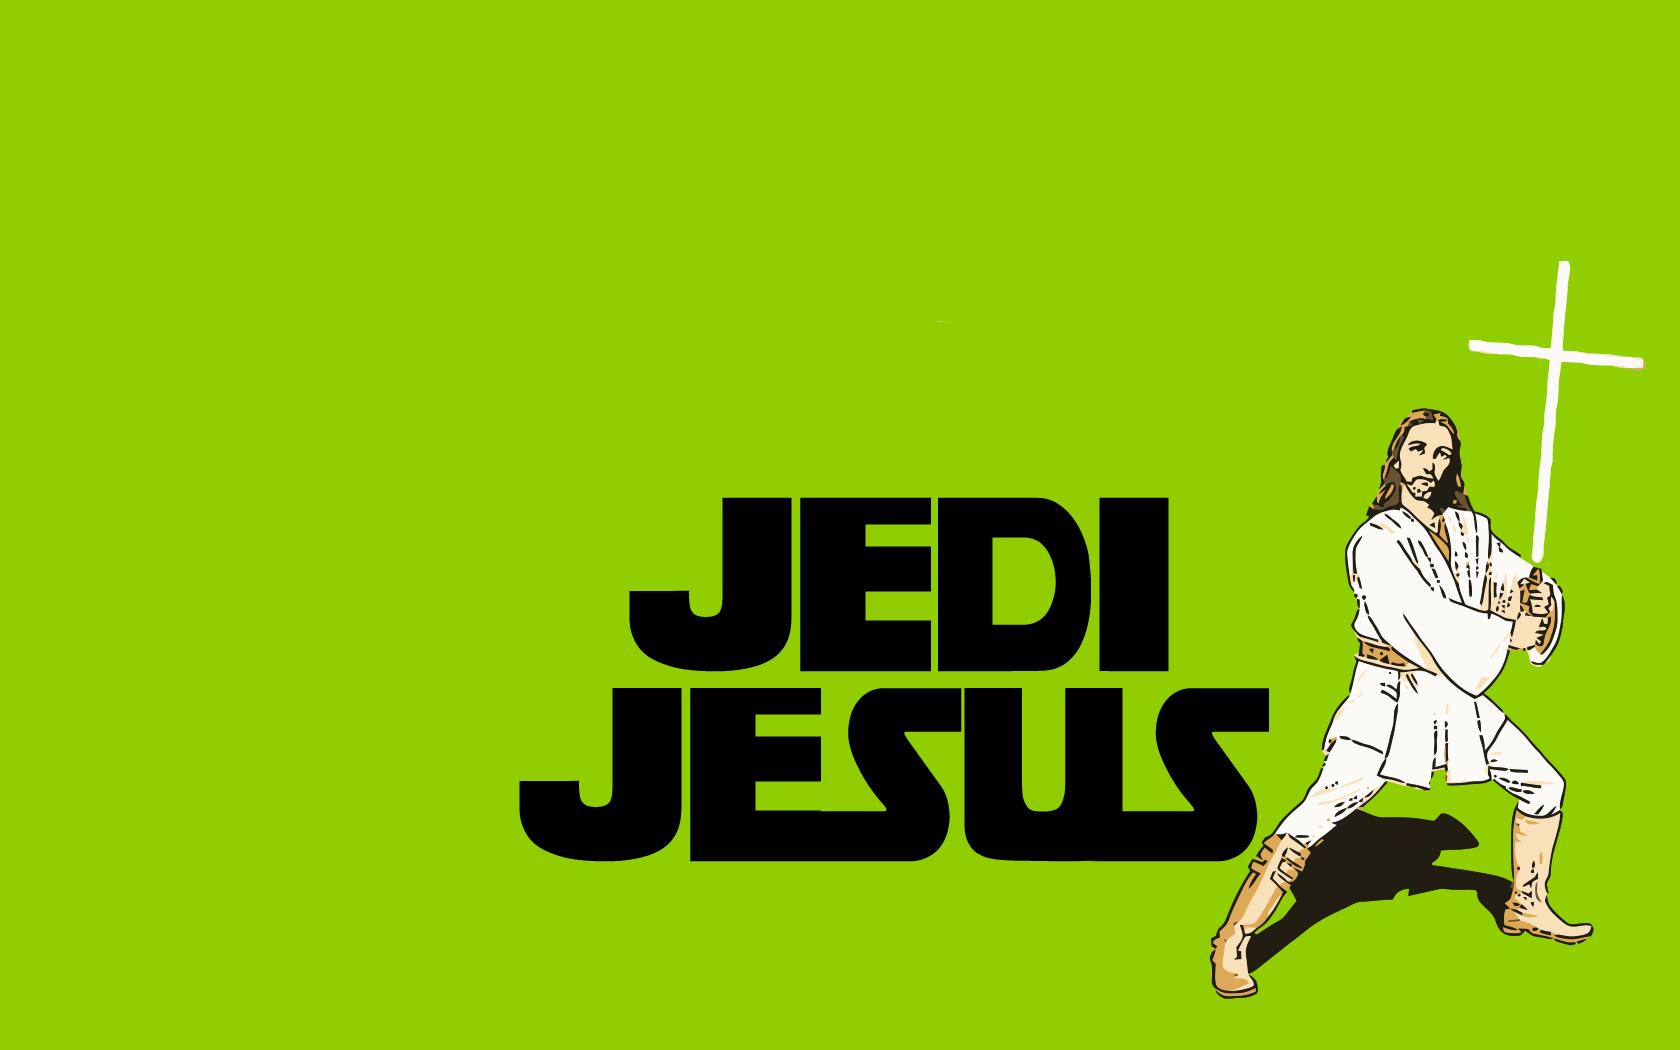 Jesus with Star Wars-themed wallpaper